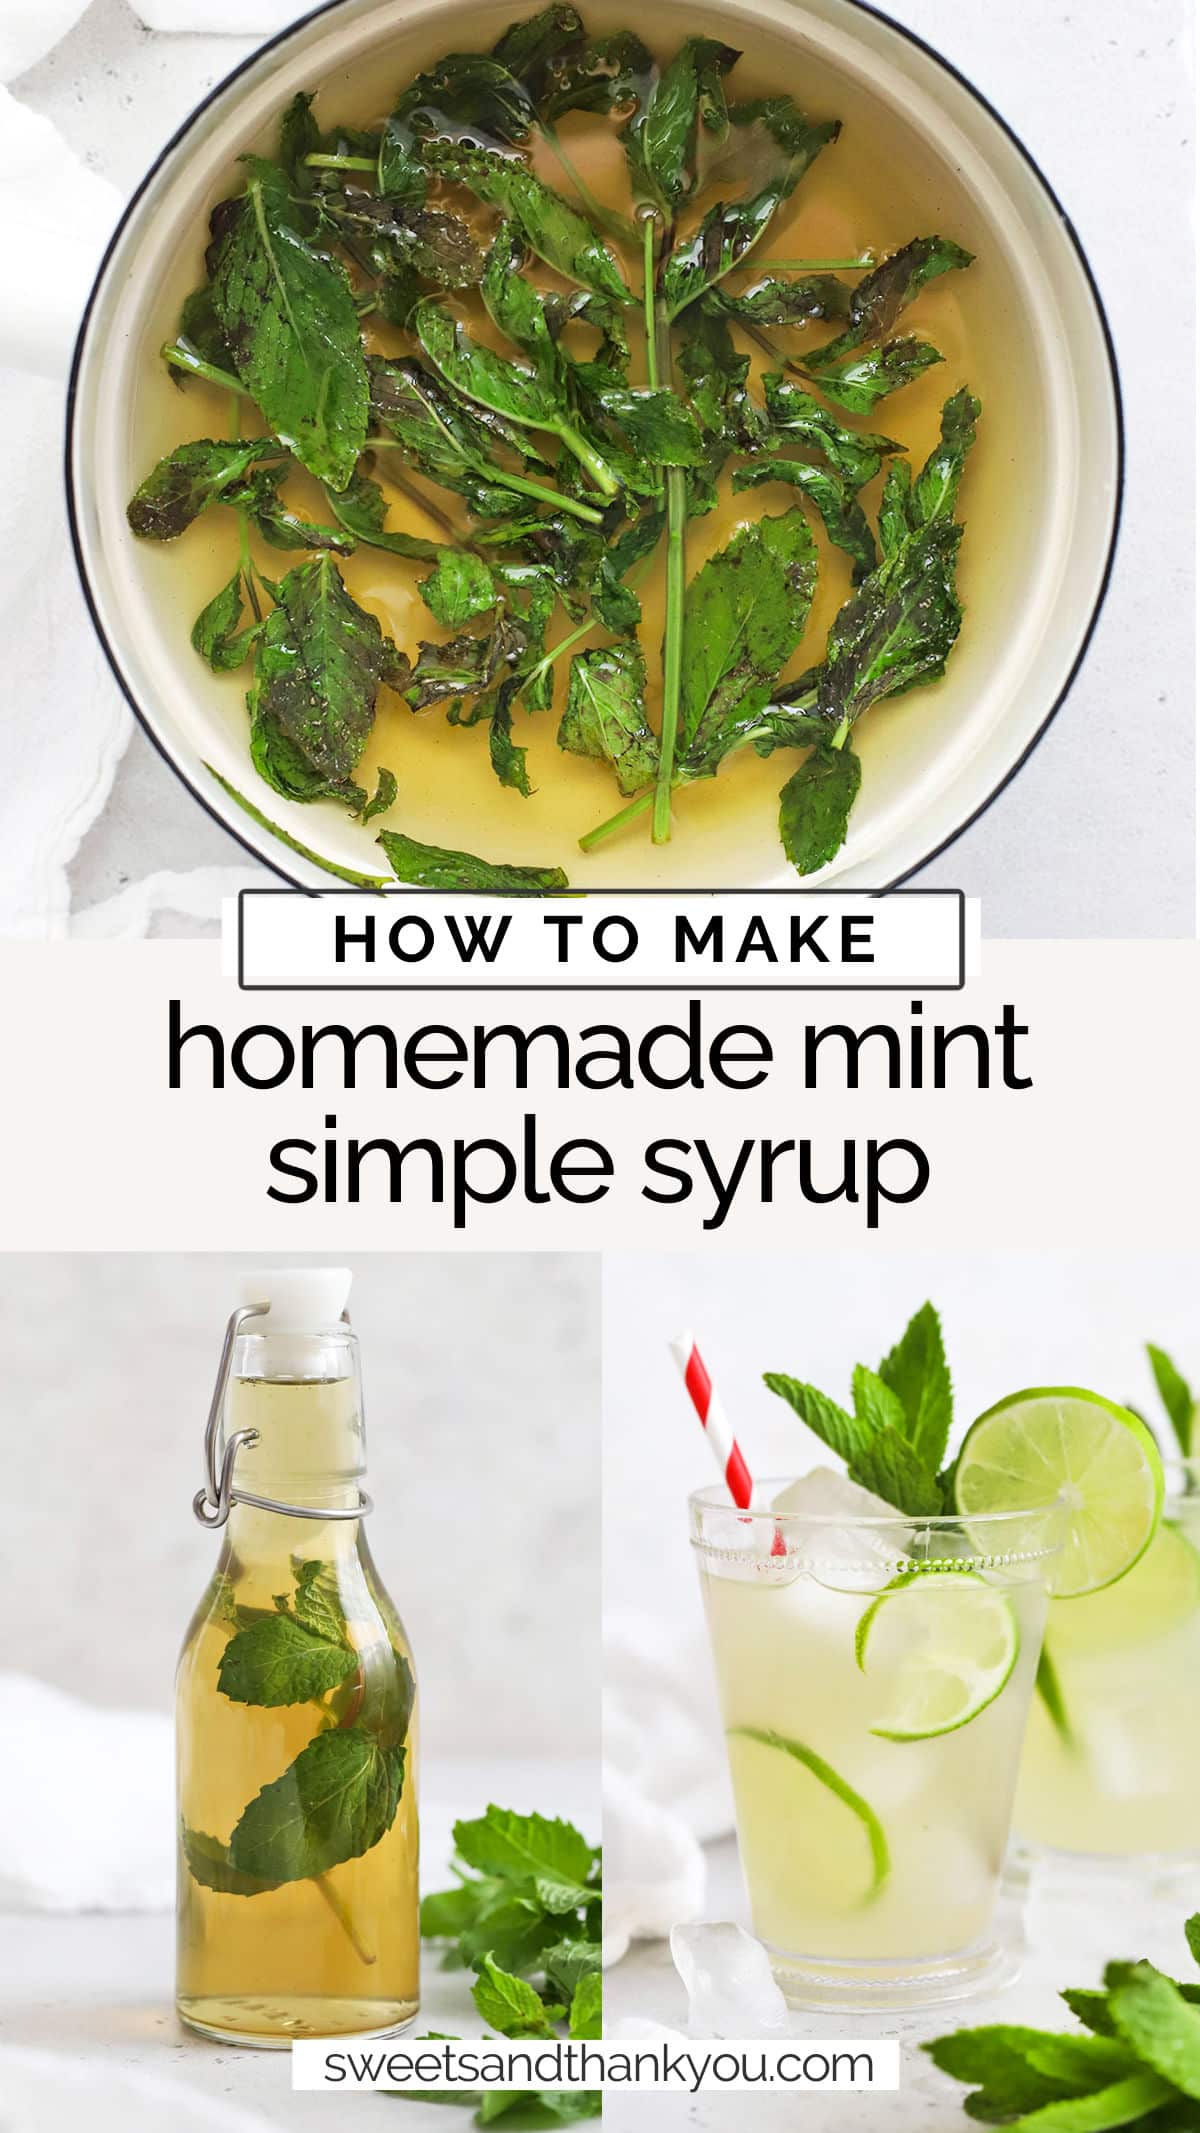 How To Make Mint Simple Syrup - This homemade mint syrup recipe is a cocktail and mocktail staple. It's perfect for drinks of all kinds! Mint simple syrup for mocktails / mocktail recipe / easy mint syrup / easy simple syrup recipe / easy mint simple syrup recipe / the best mint simple syrup recipe / non-alcoholic drinks / cocktail syrup / mocktail syrup / mocktail mixer / non alcoholic mixer / drinks with mint simple syrup / ways to use simple syrup